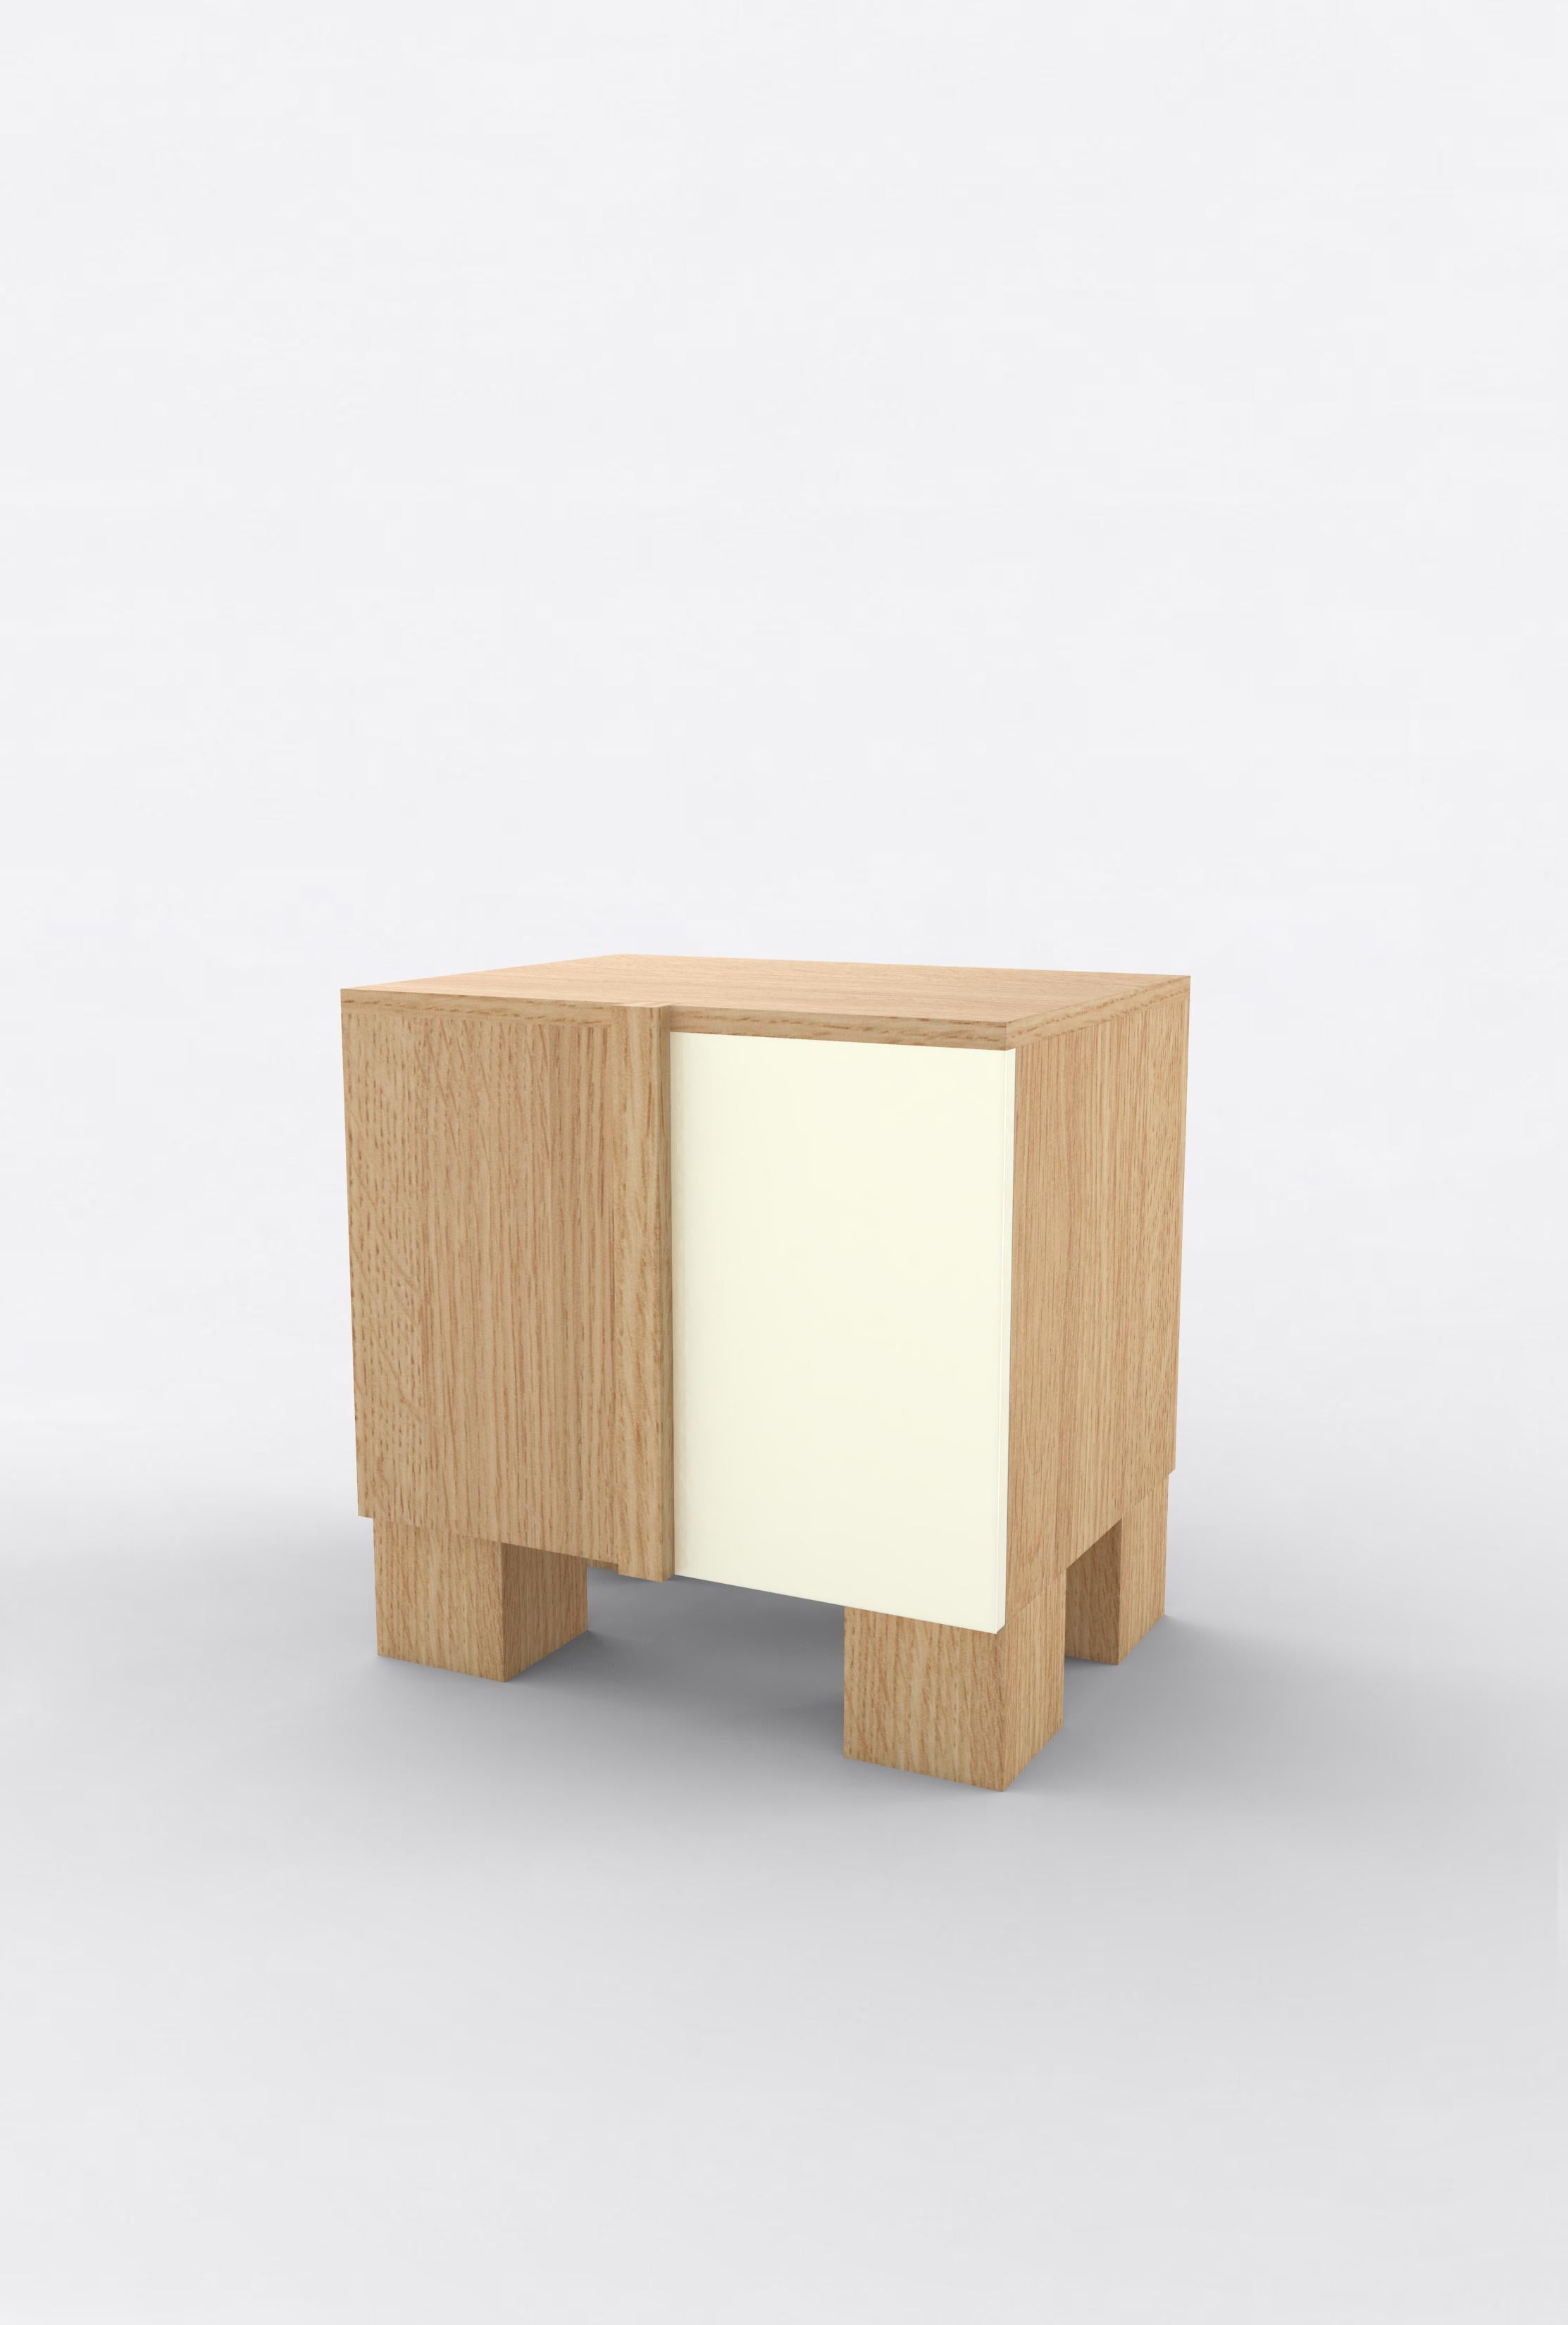 Orphan Work 100 Bedside
Shown in oak and white or off-white
Available in natural oak with painted door.
Measures: 24” W x 15” D x 22” H
2 doors with adjustable shelves. 

Orphan work is designed to complement in the heart of Soho, New York City.